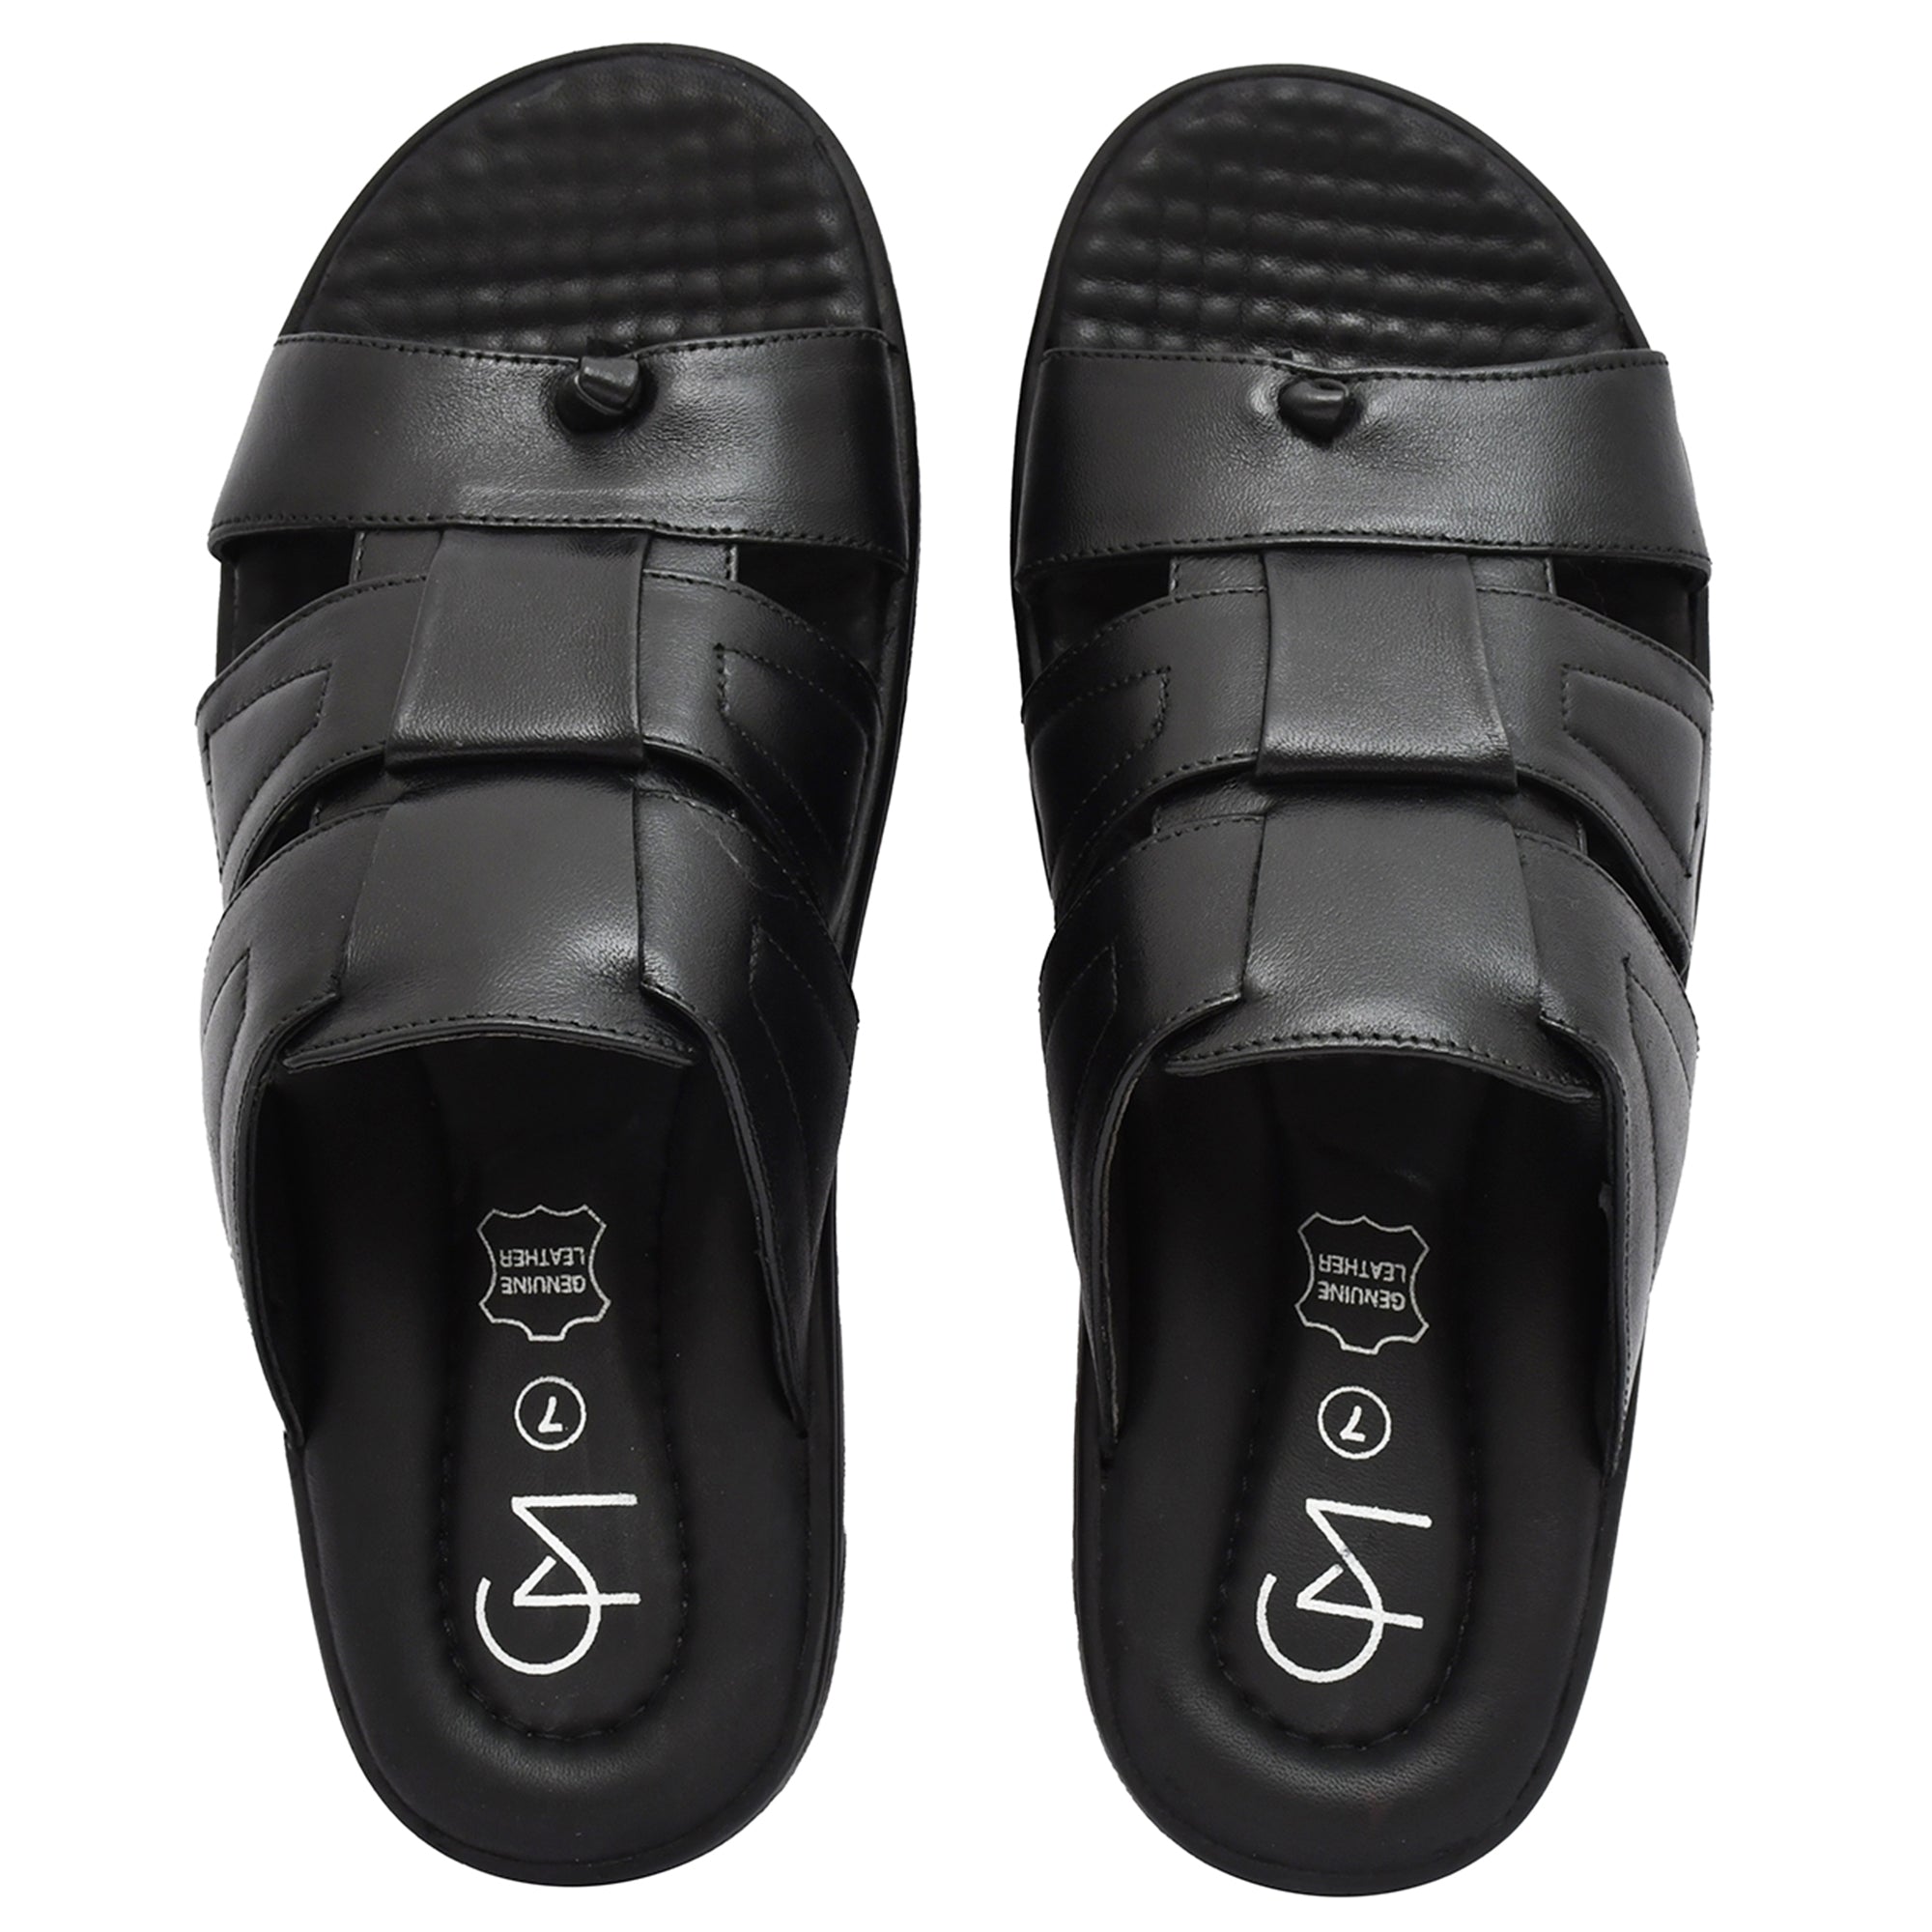 CM Leather slippers for men's